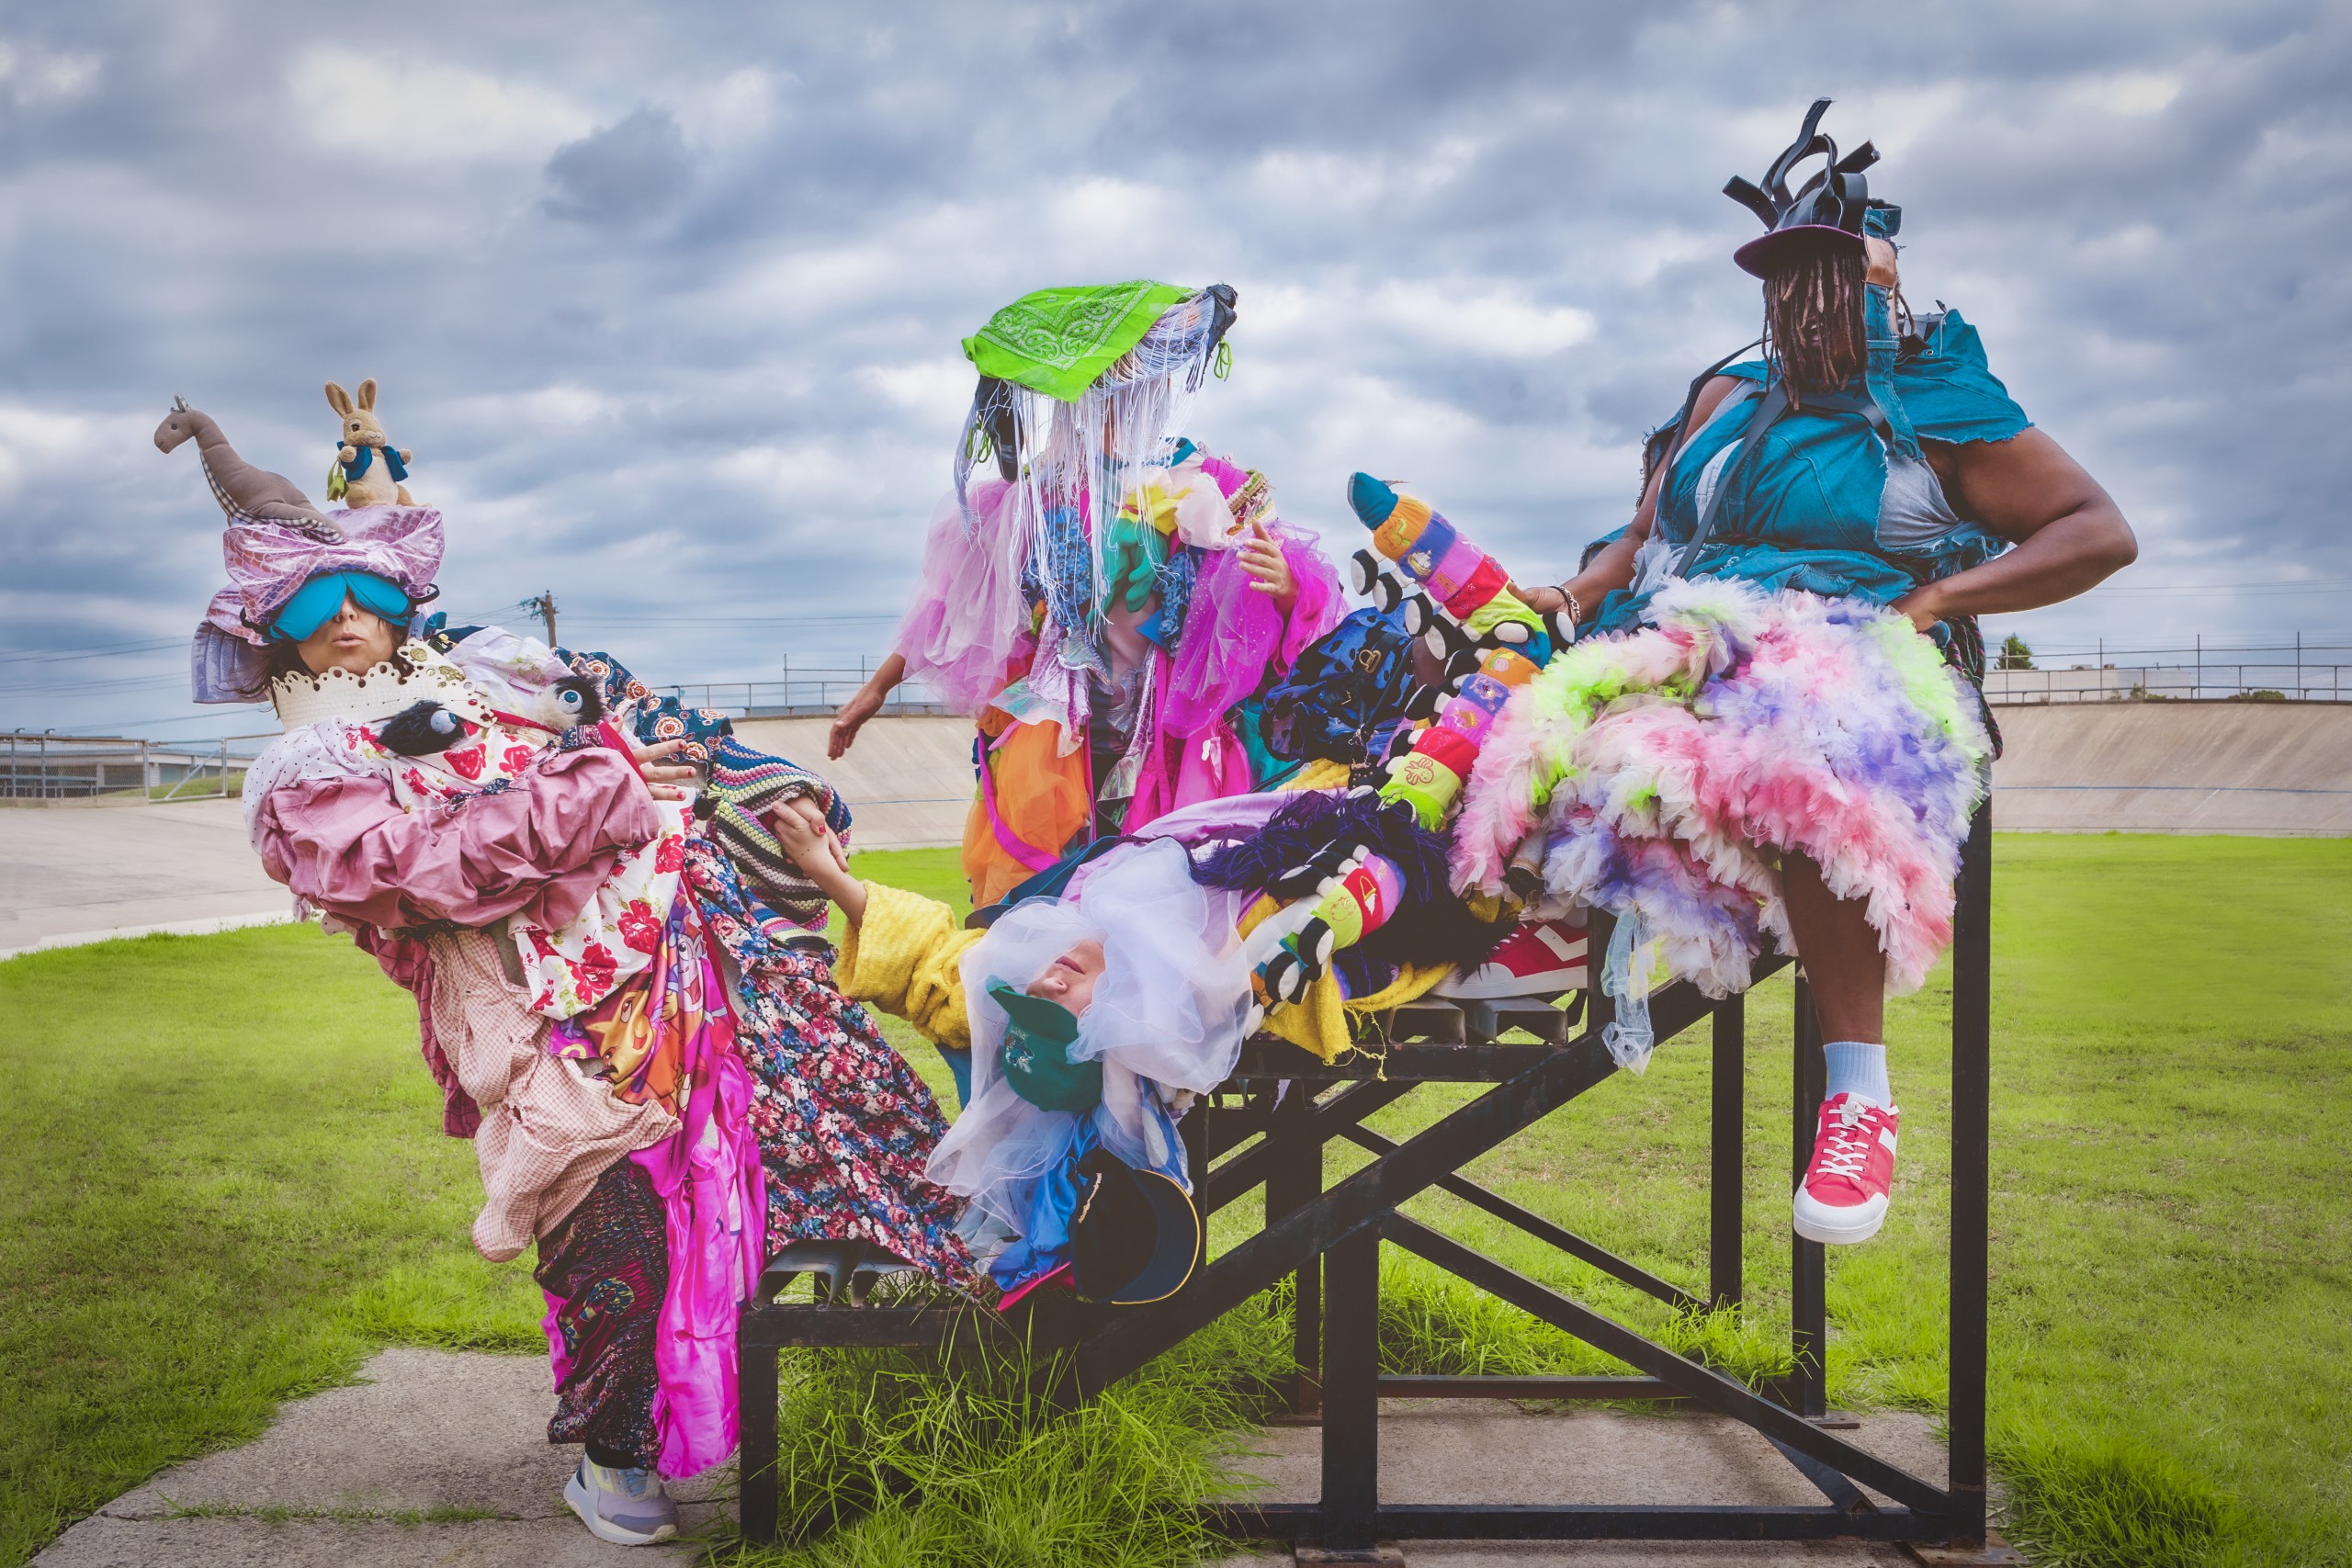 Four performers are draped over an outdoor seating bank in an oval. The sky above them is overcast. Each performer is heavily laden in costumes of layered fabrics, soft toys, tulle etc. Their body shapes are dwarved and faces obscured by the strange costumes and extravagant hats.